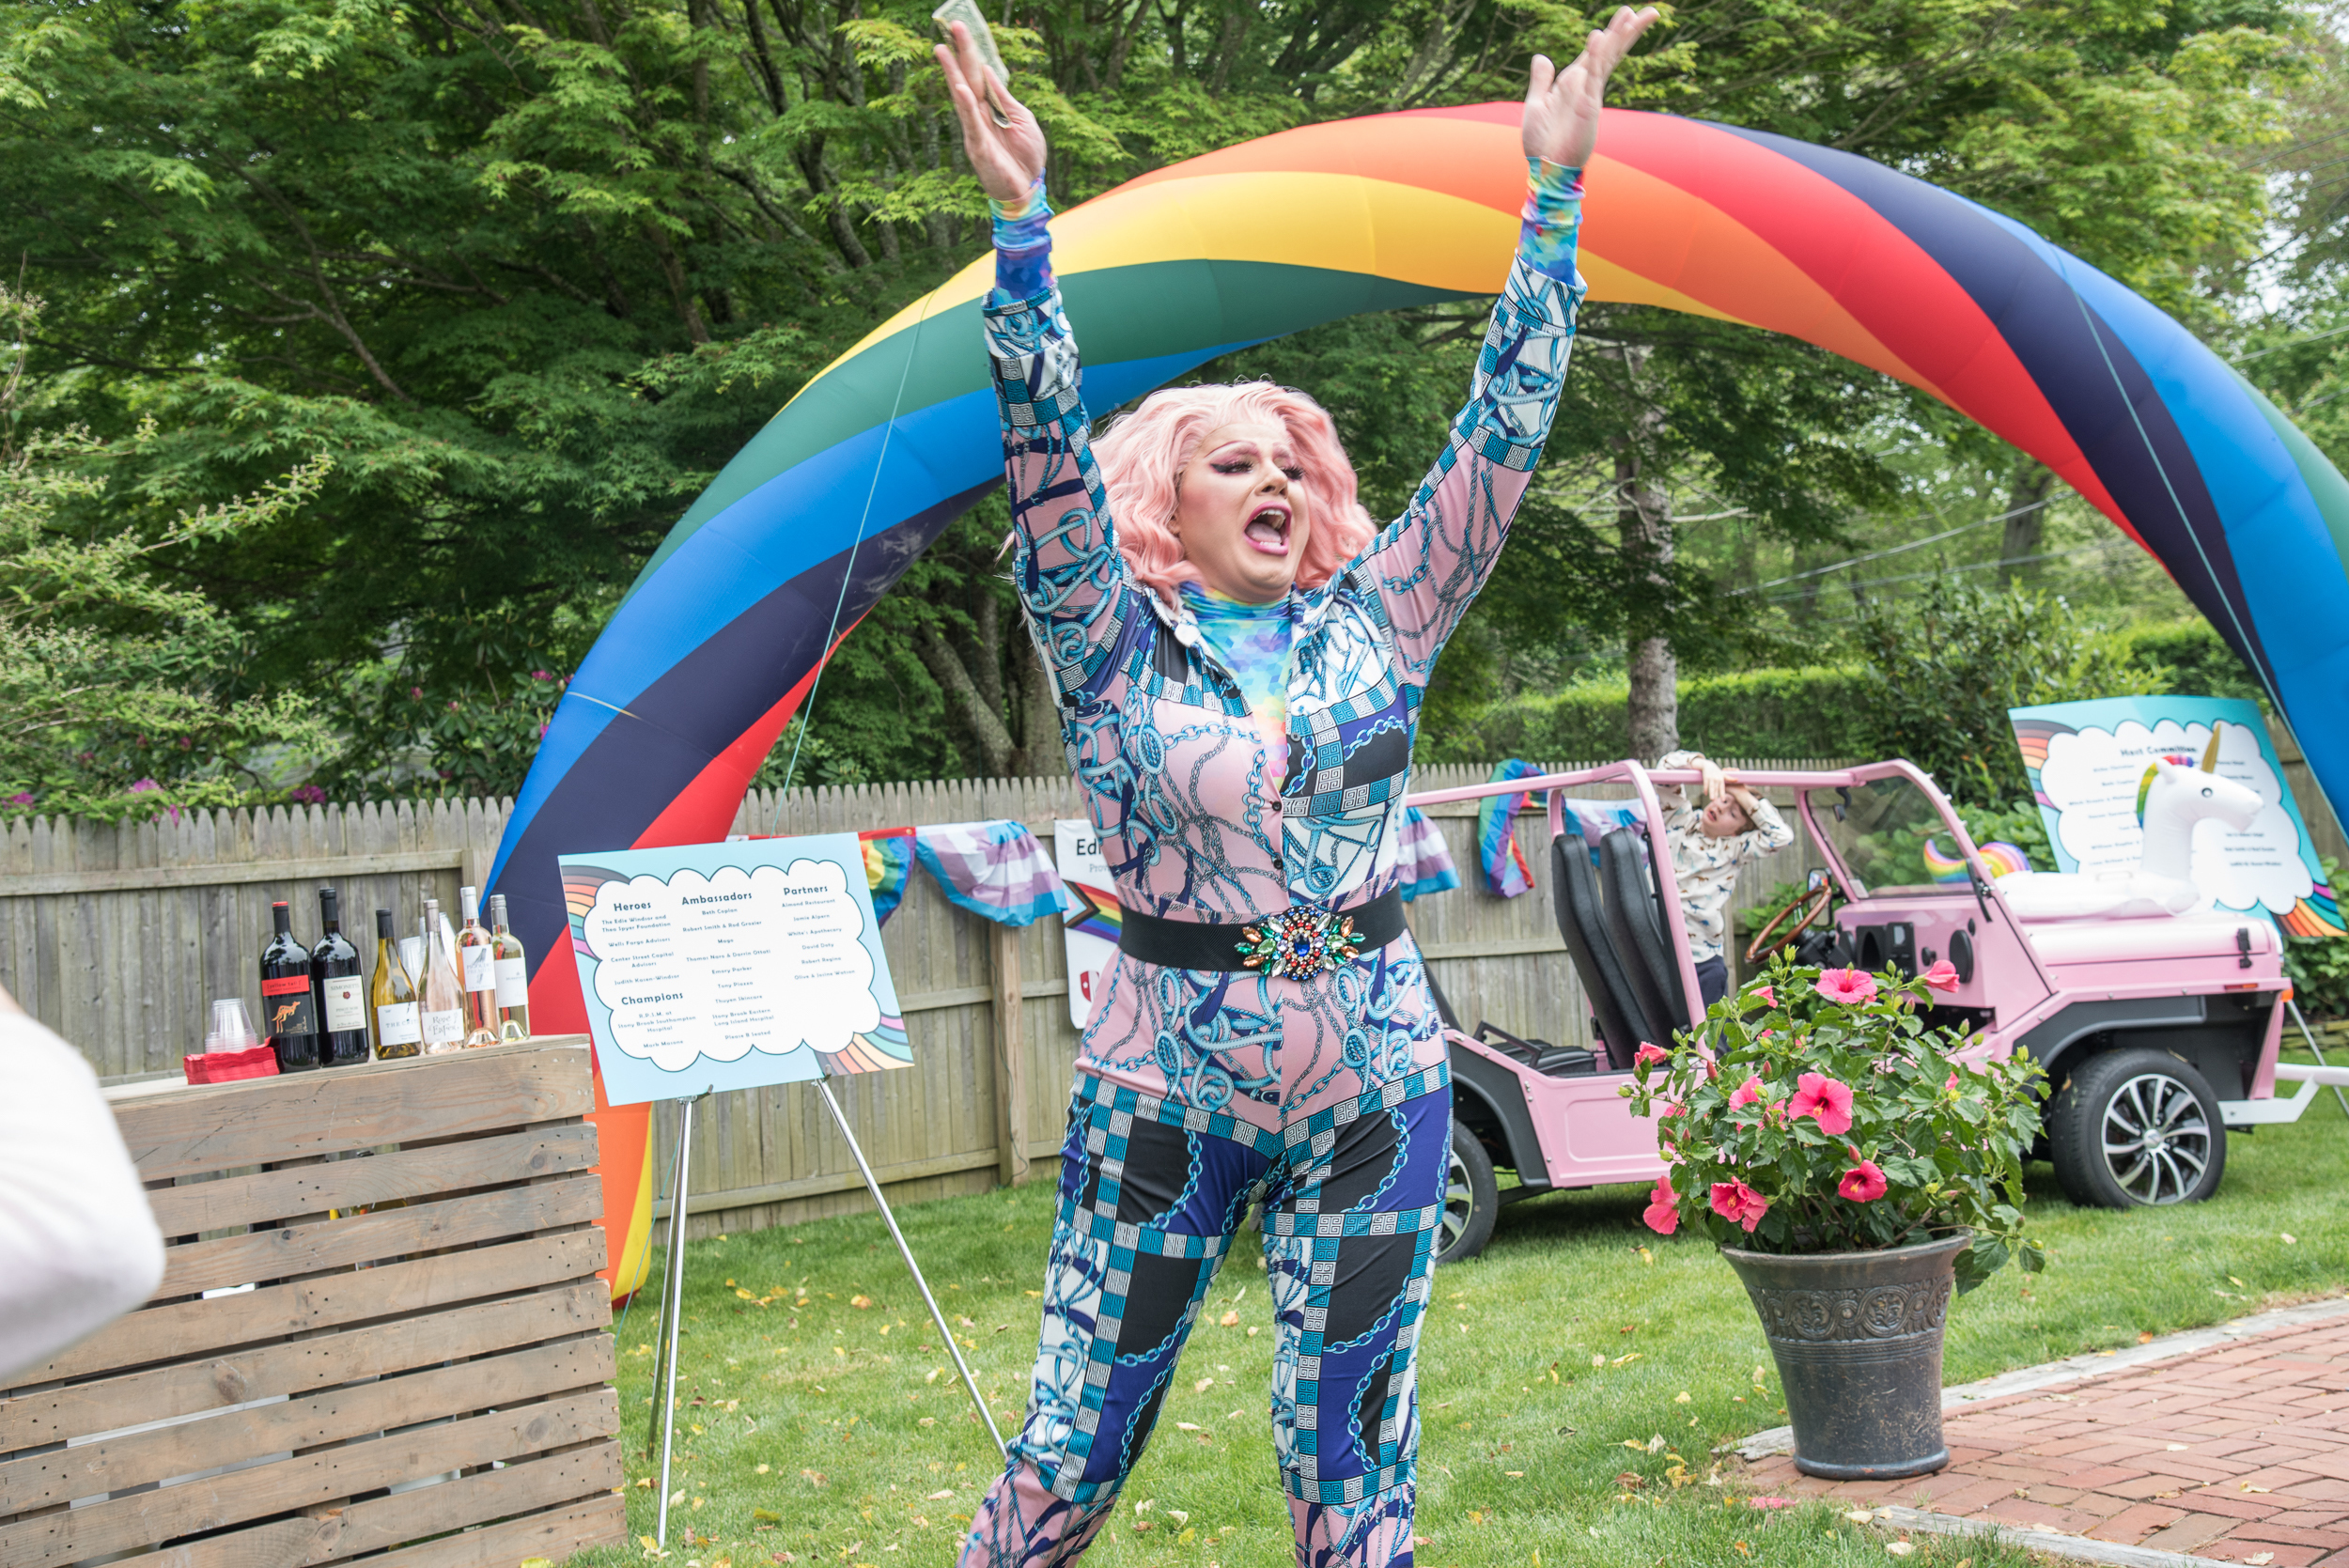 Victoria Falls at the annual Edie’s Backyard BBQ  on Saturday to benefit the Edie Windsor Healthcare  Center at Stony Brook Southampton Hospital.  LISA TAMBURINI